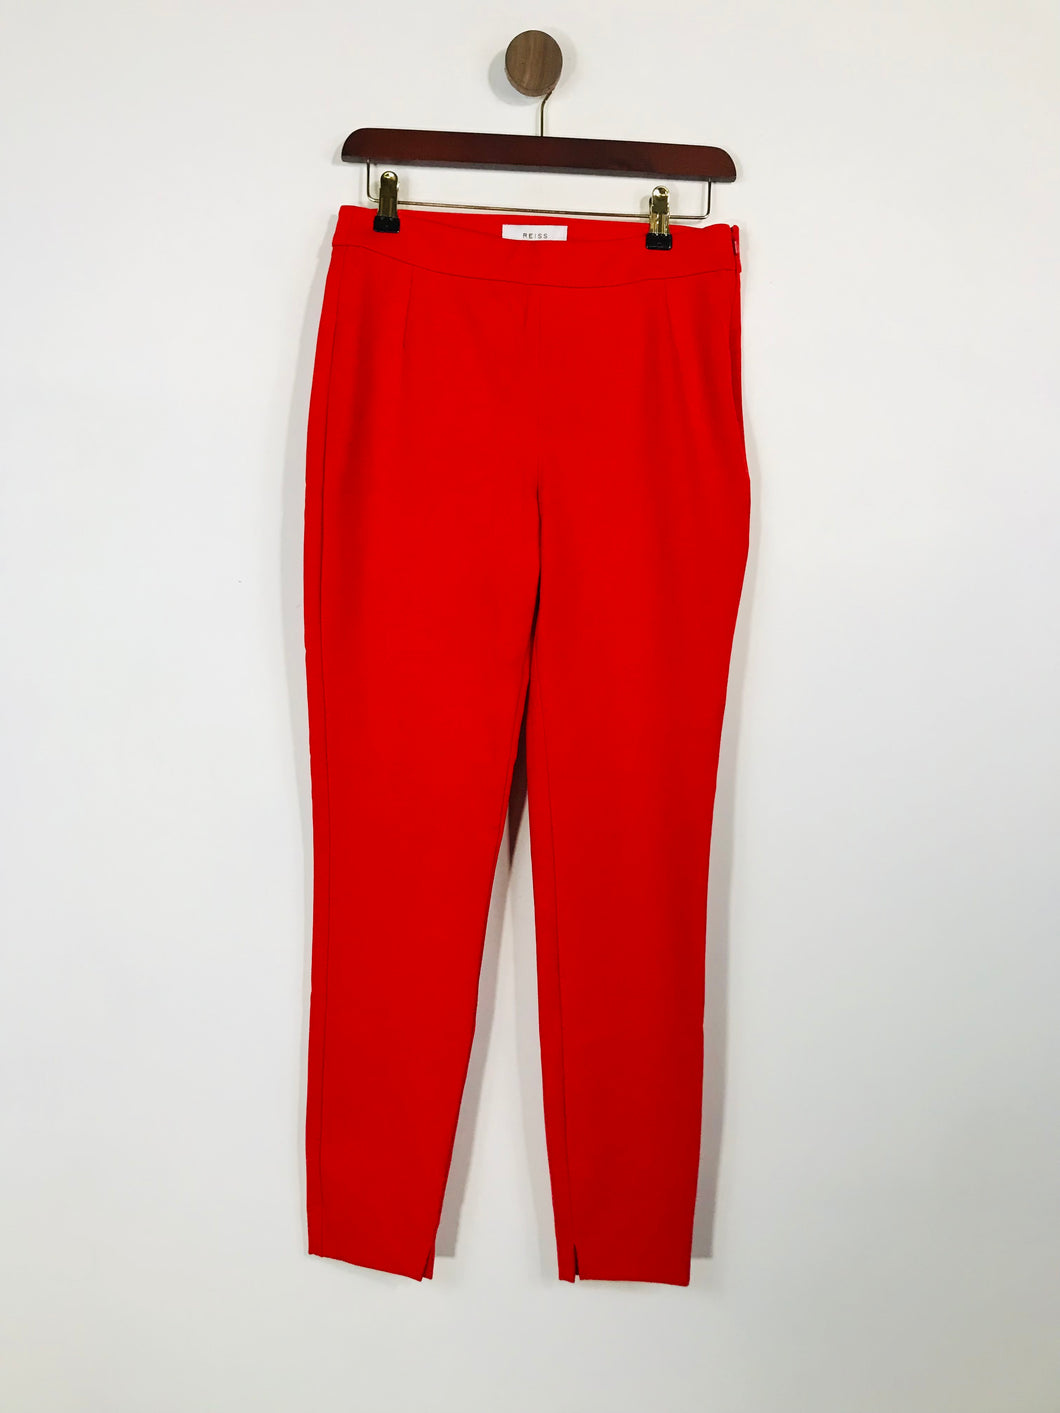 Reiss Women's Skinny Chinos Trousers NWT | UK10 | Red